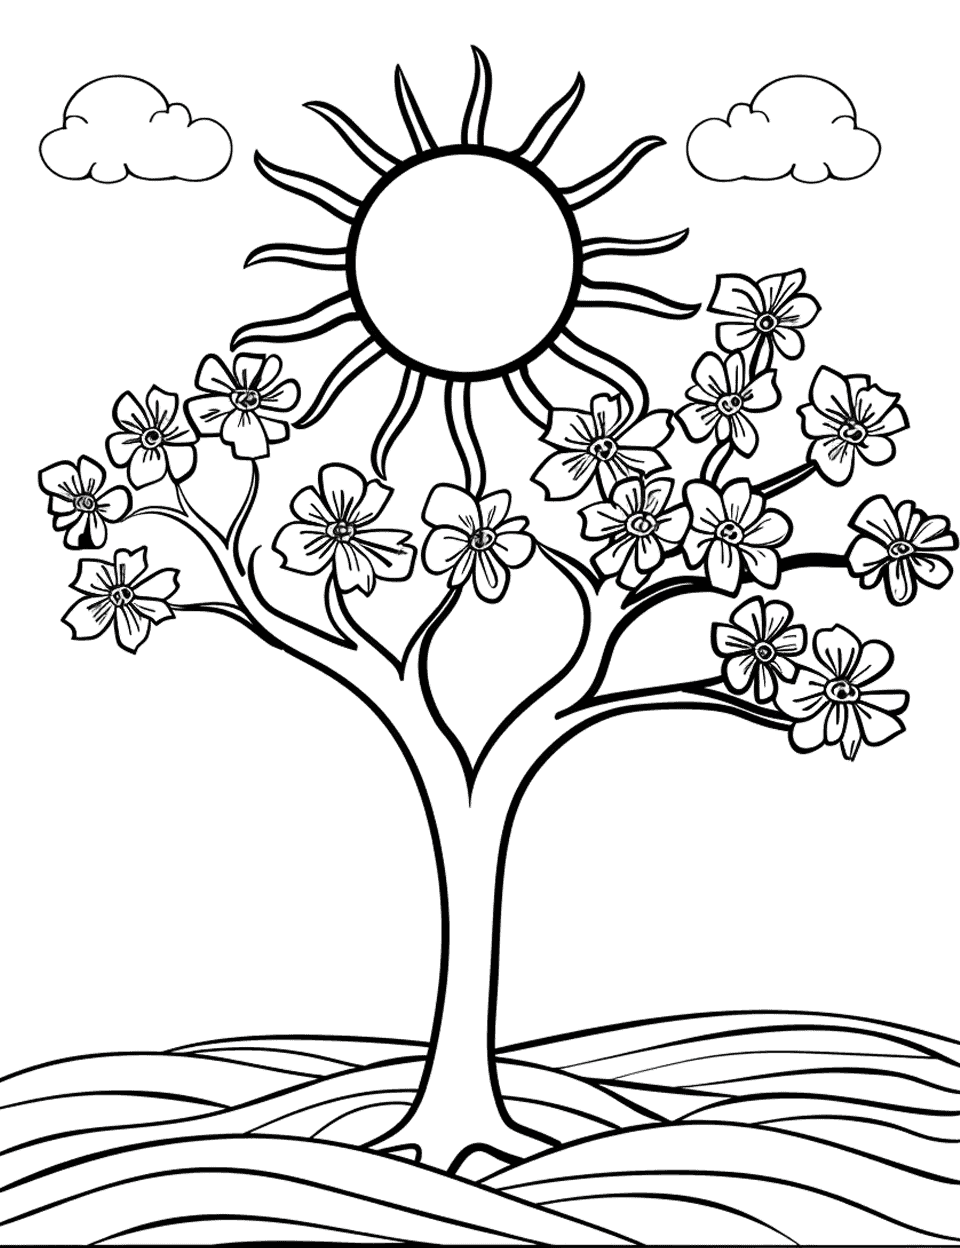 Spring Sun and Blooming Cherry Trees Coloring Page - Cherry trees in full bloom under the warm spring sun.